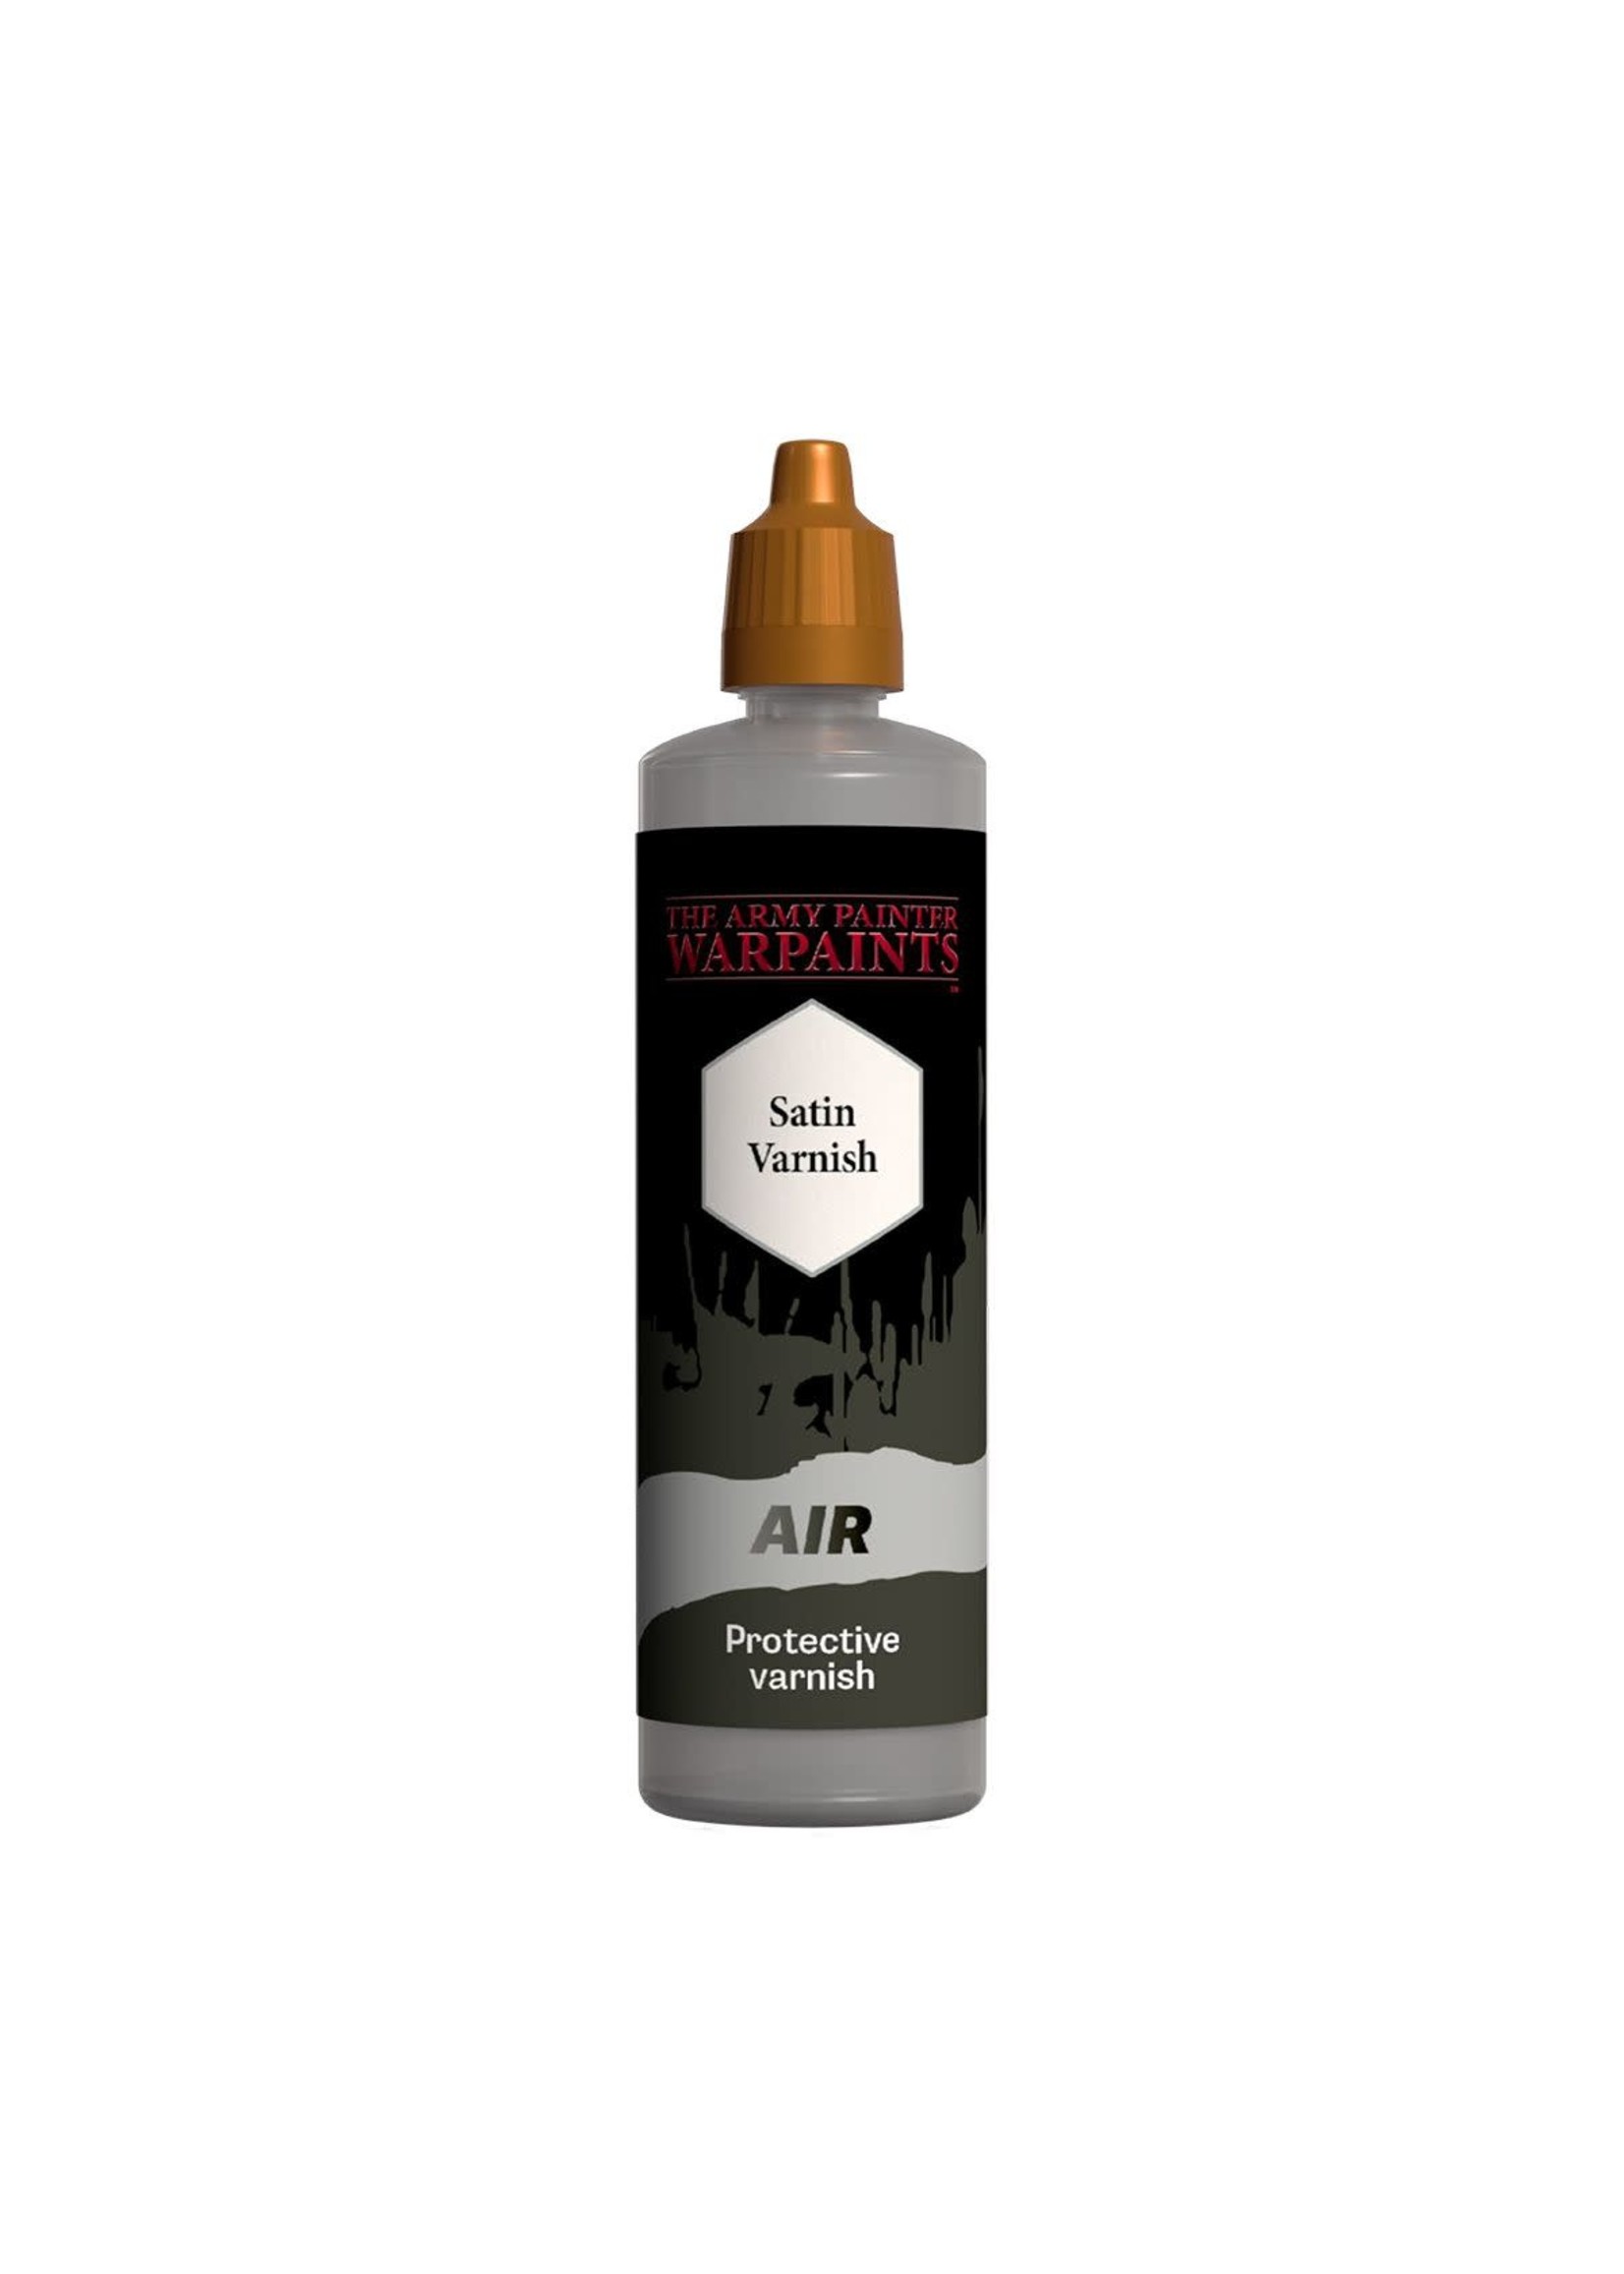 The Army Painter Air - Satin Varnish (Protective Varnish) - The Army Painter